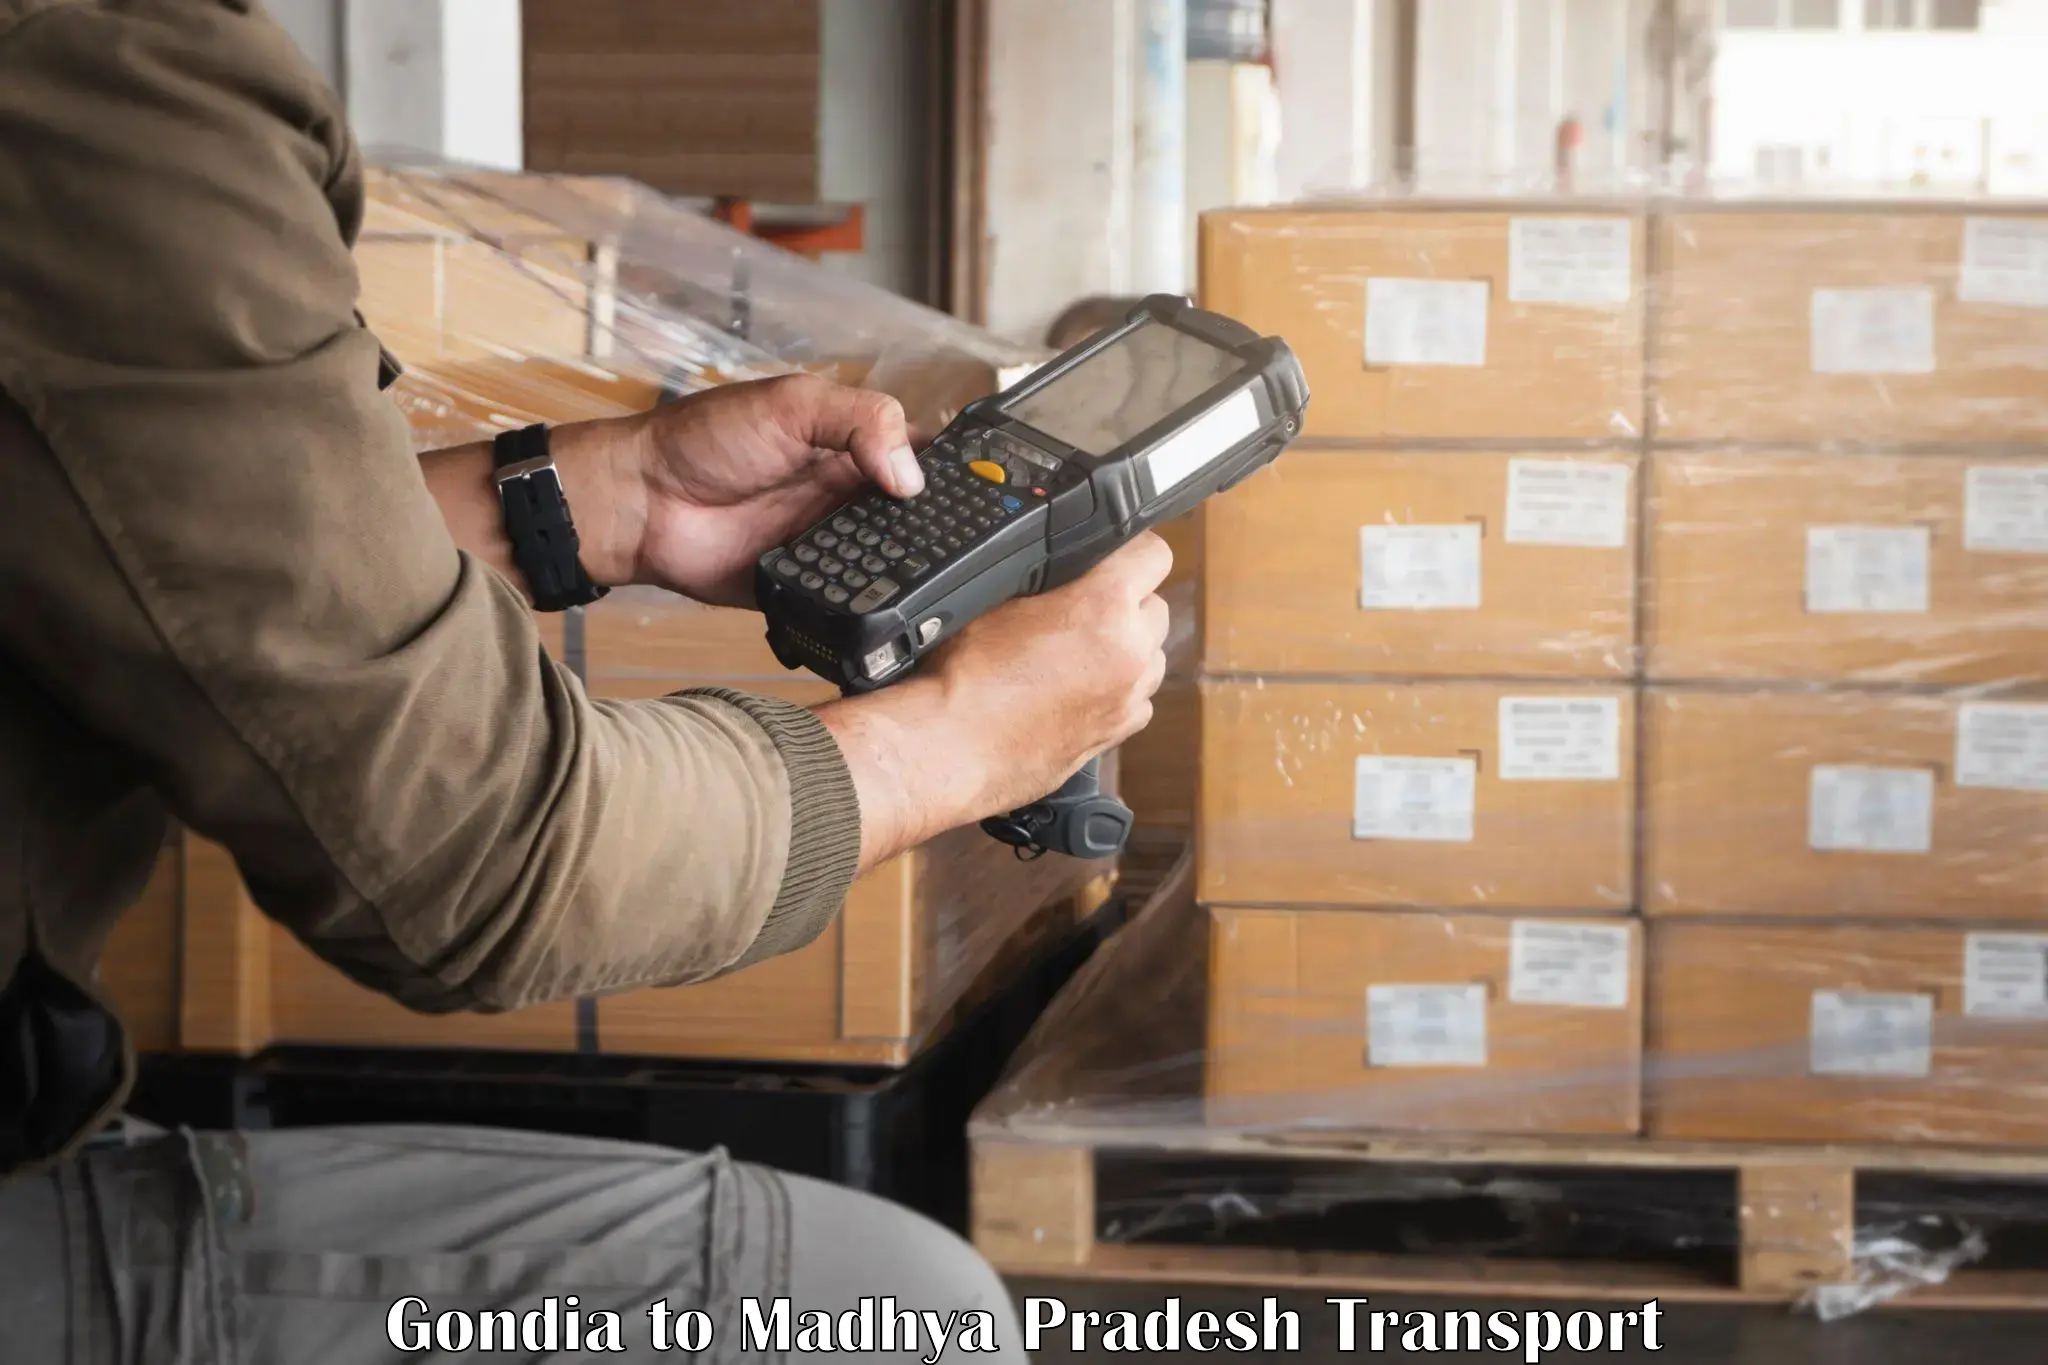 Truck transport companies in India Gondia to Anuppur